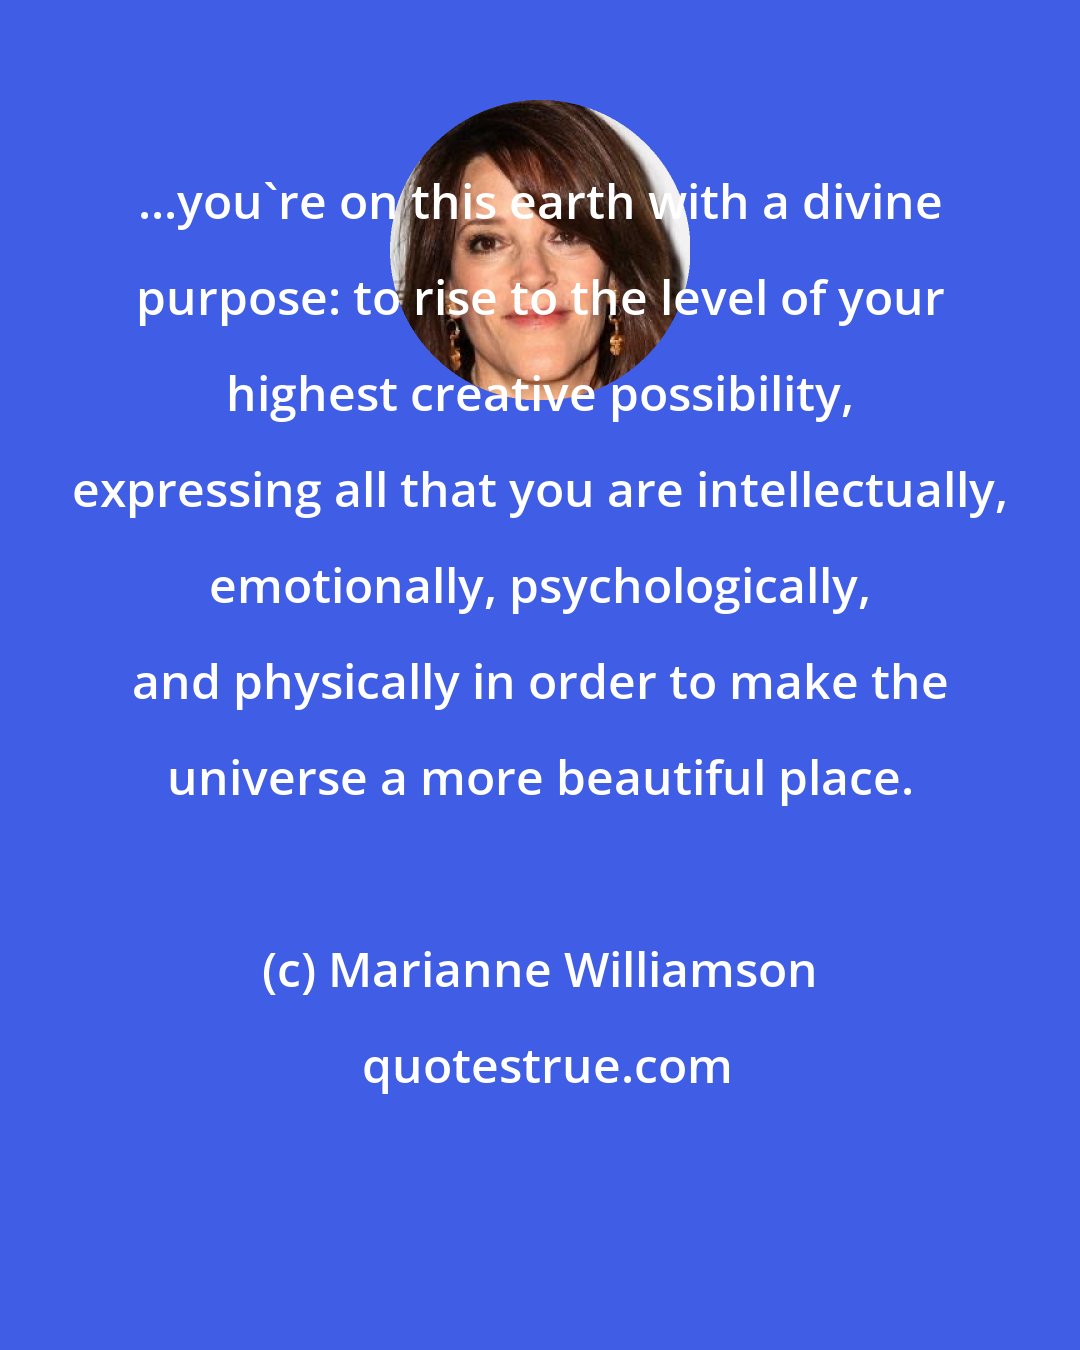 Marianne Williamson: ...you're on this earth with a divine purpose: to rise to the level of your highest creative possibility, expressing all that you are intellectually, emotionally, psychologically, and physically in order to make the universe a more beautiful place.